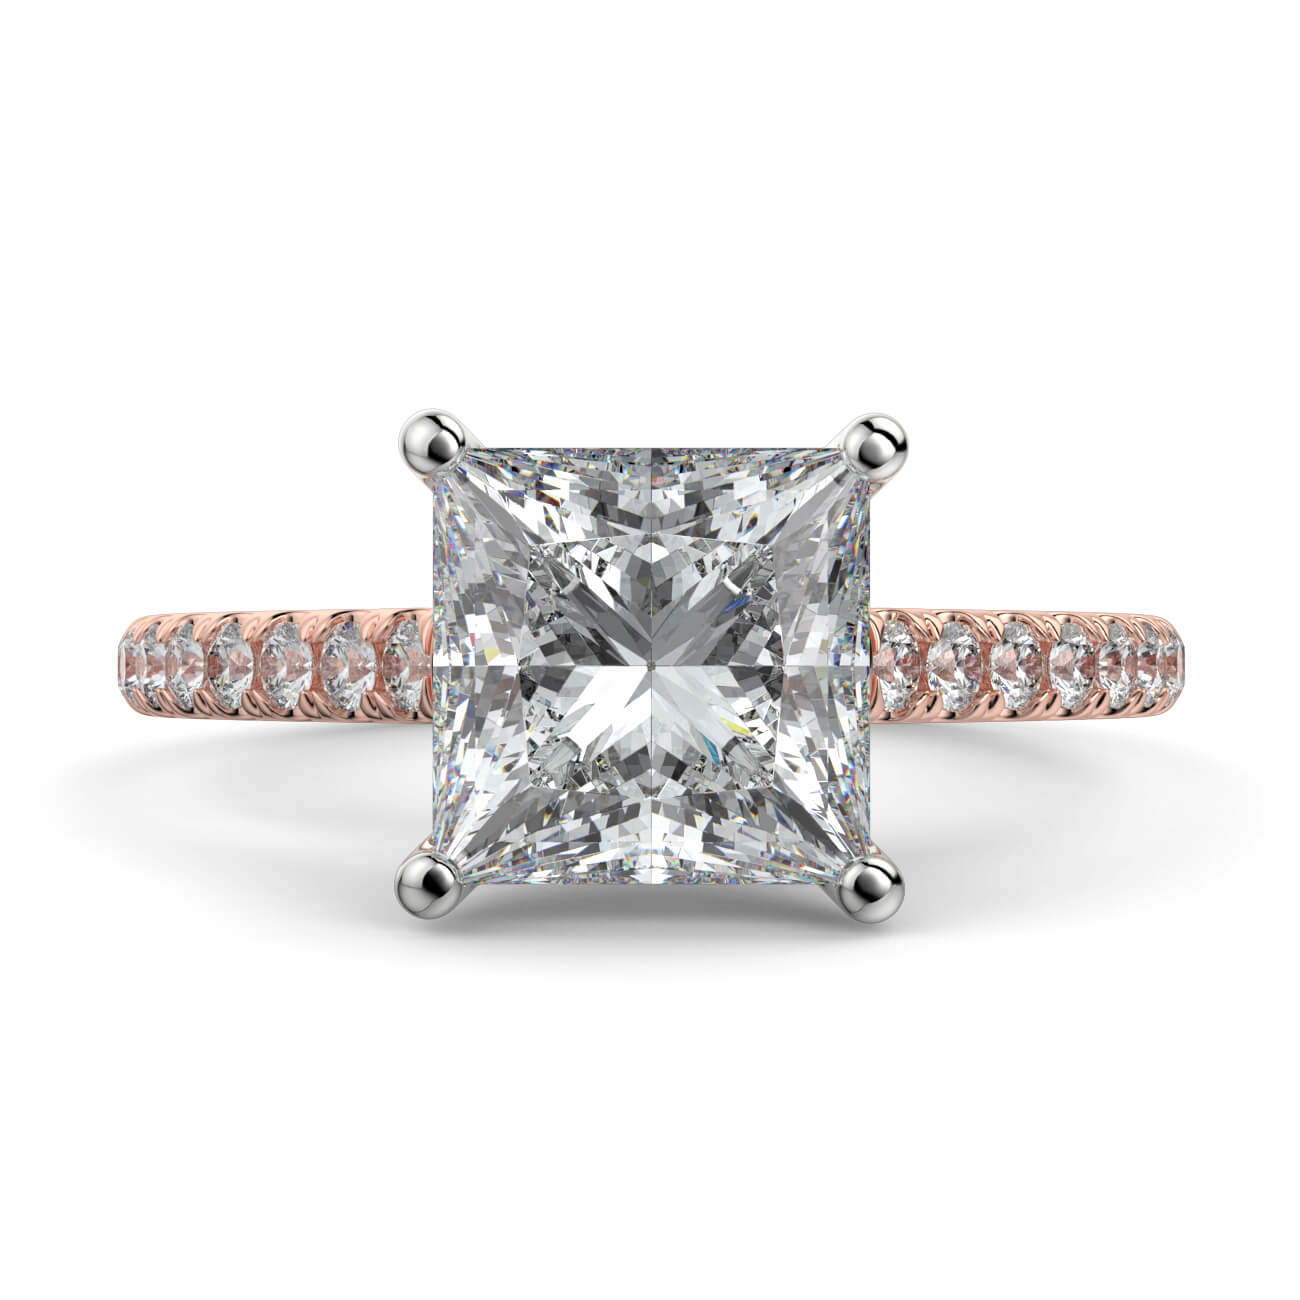 Princess Cut diamond cathedral engagement ring in rose and white gold – Australian Diamond Network